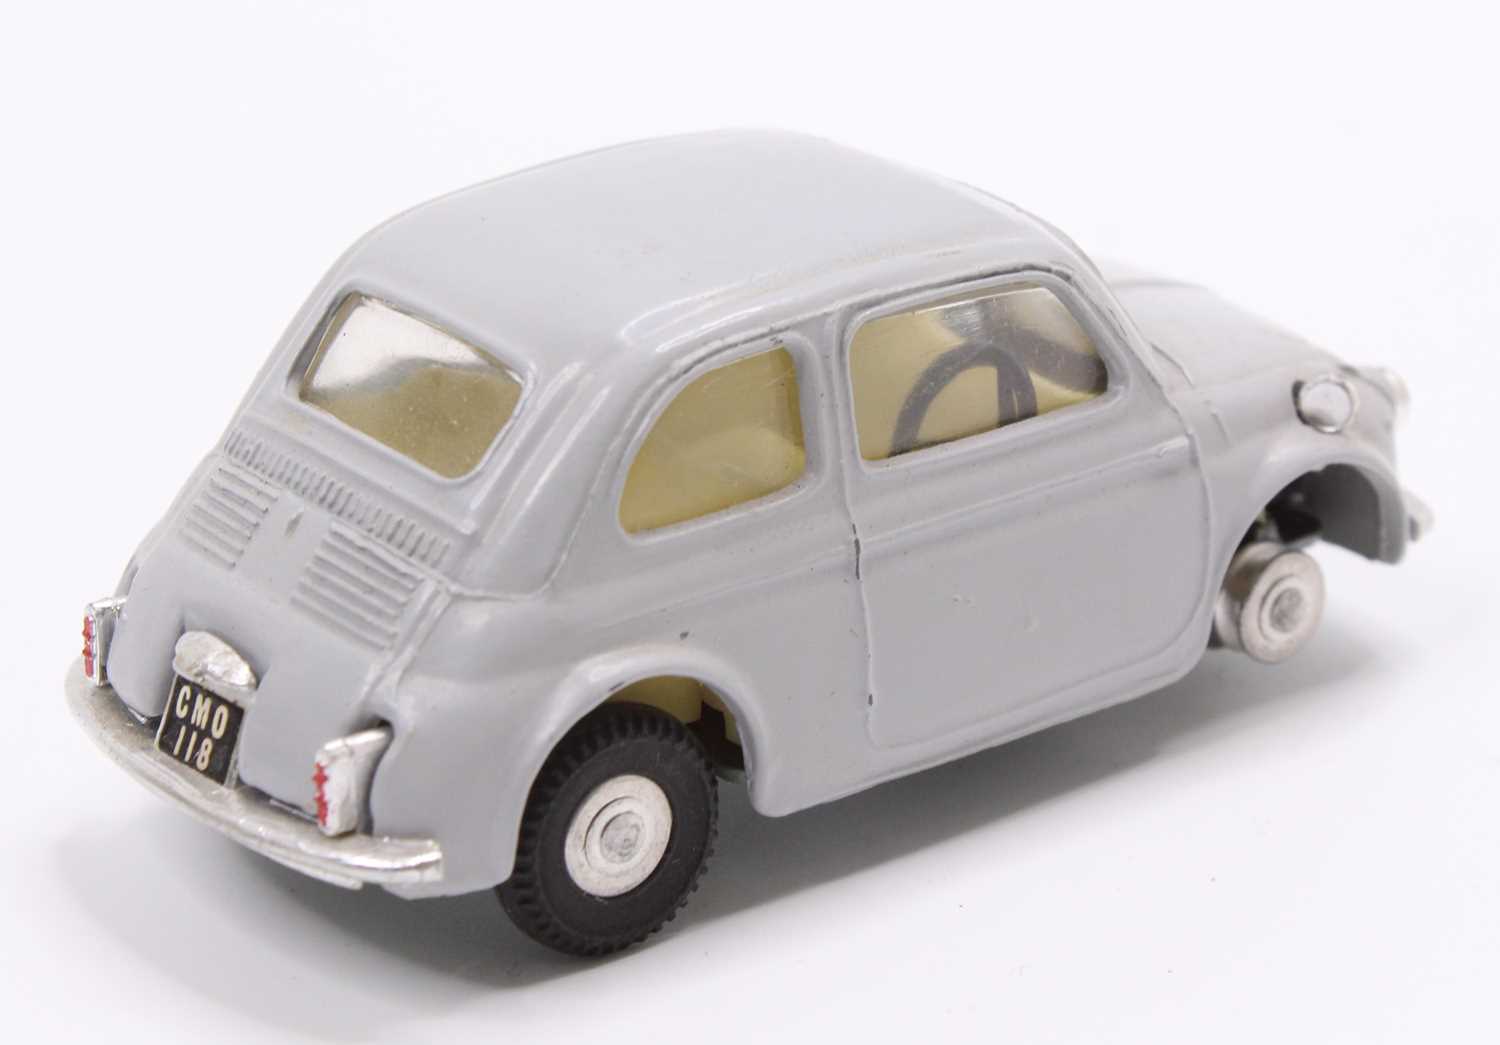 A Spot-On Models No. 185 Fiat 500 comprising grey body with yellow interior and spun hubs, missing - Image 4 of 5